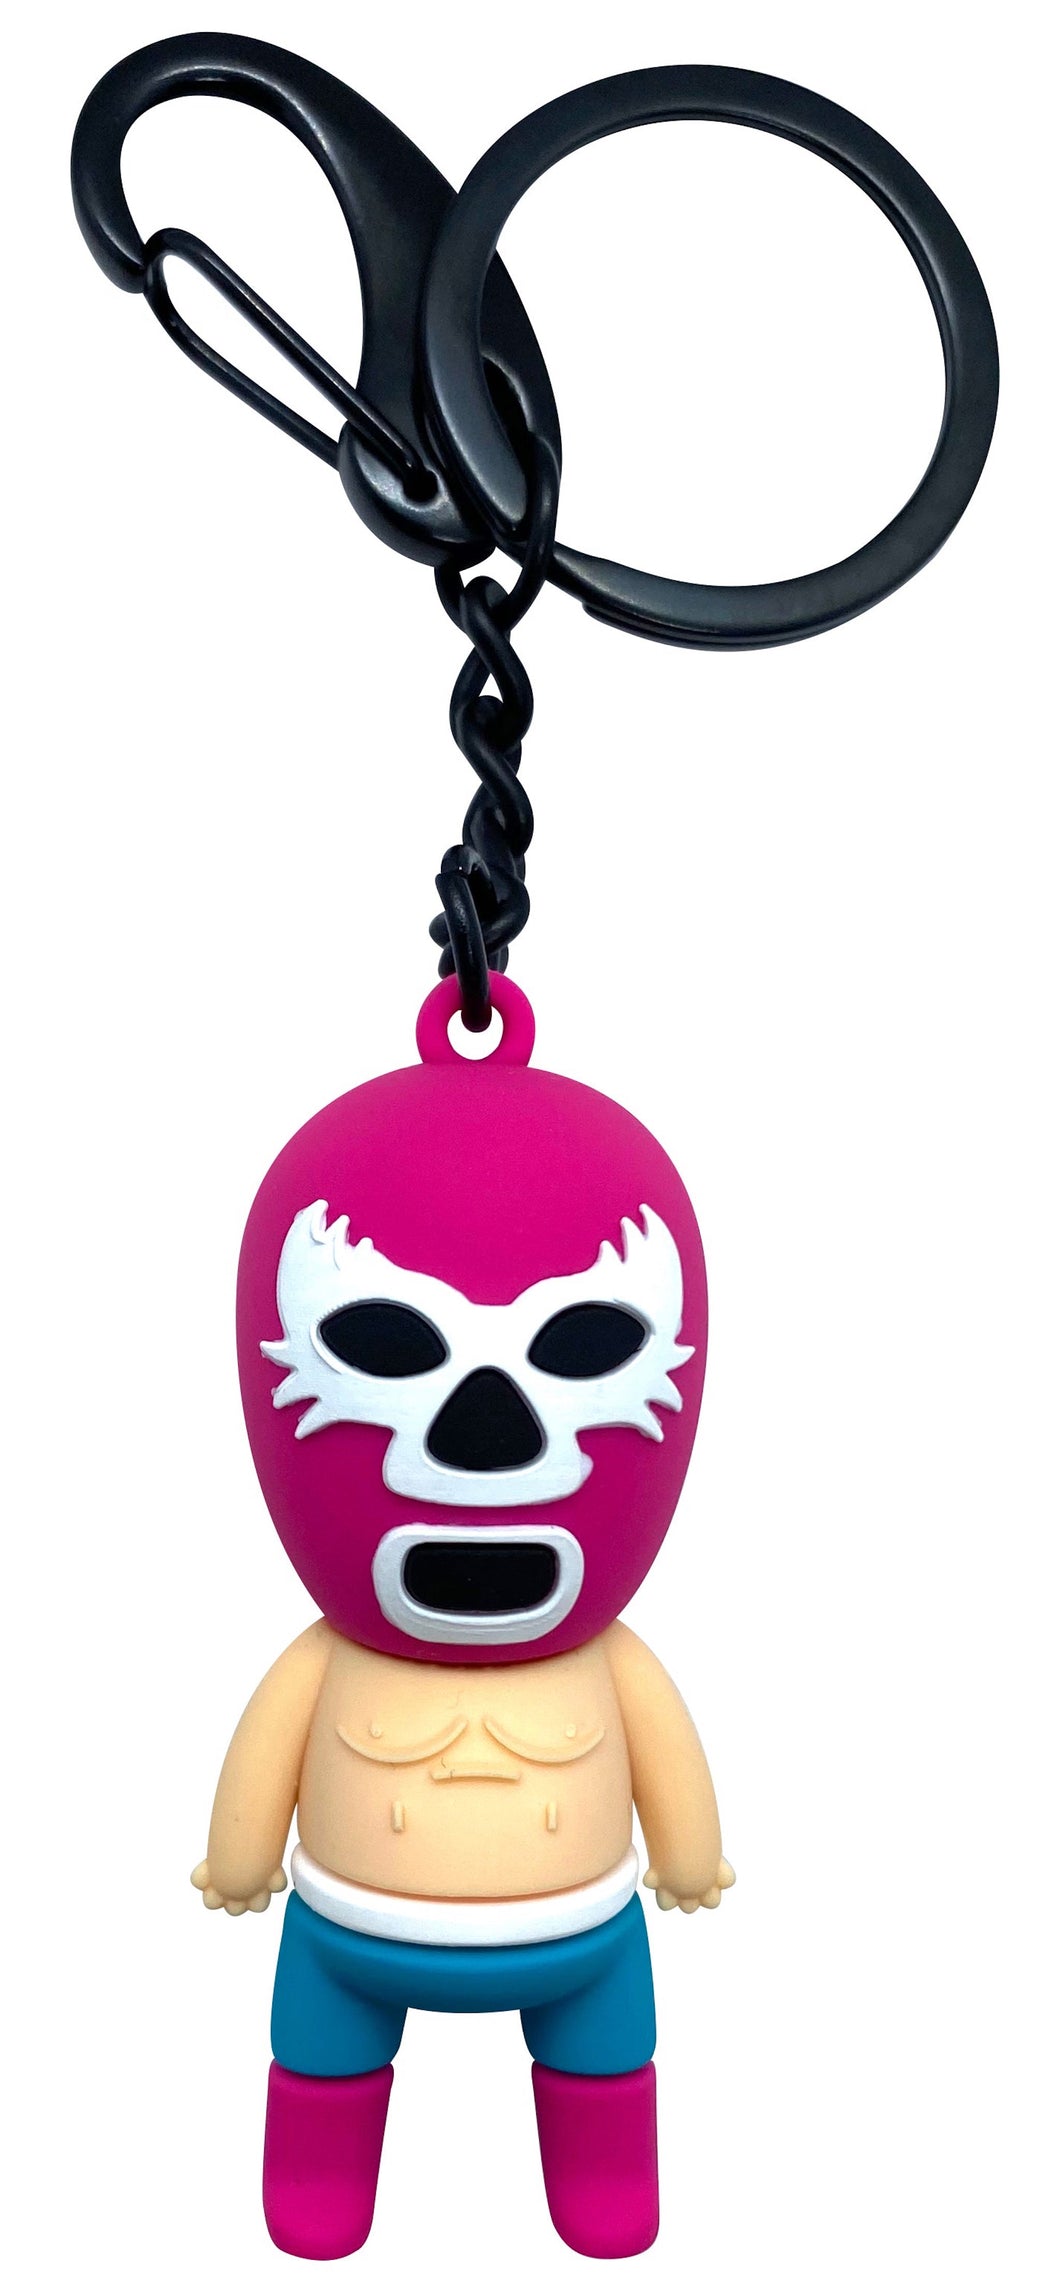 Mexican Wrestler Shaped 3D Keyring Pink 5.5cm - ByMexico